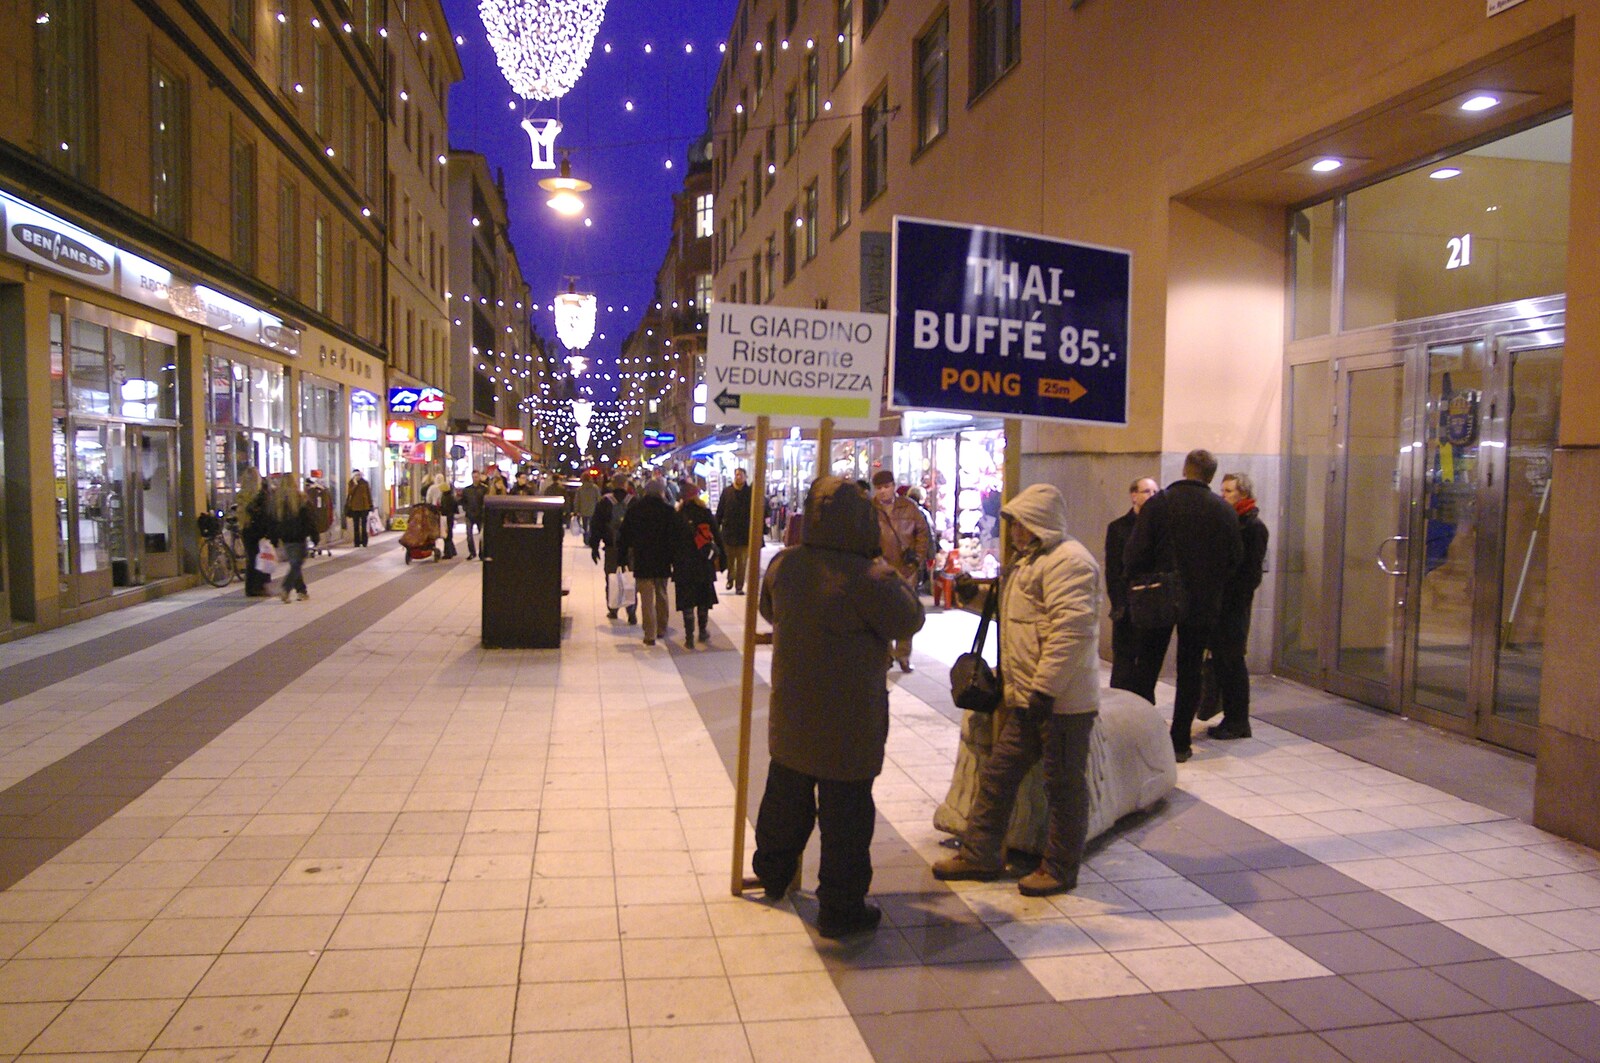 The shopping street in the dusk from Gamla Stan, Stockholm, Sweden - 15th December 2007